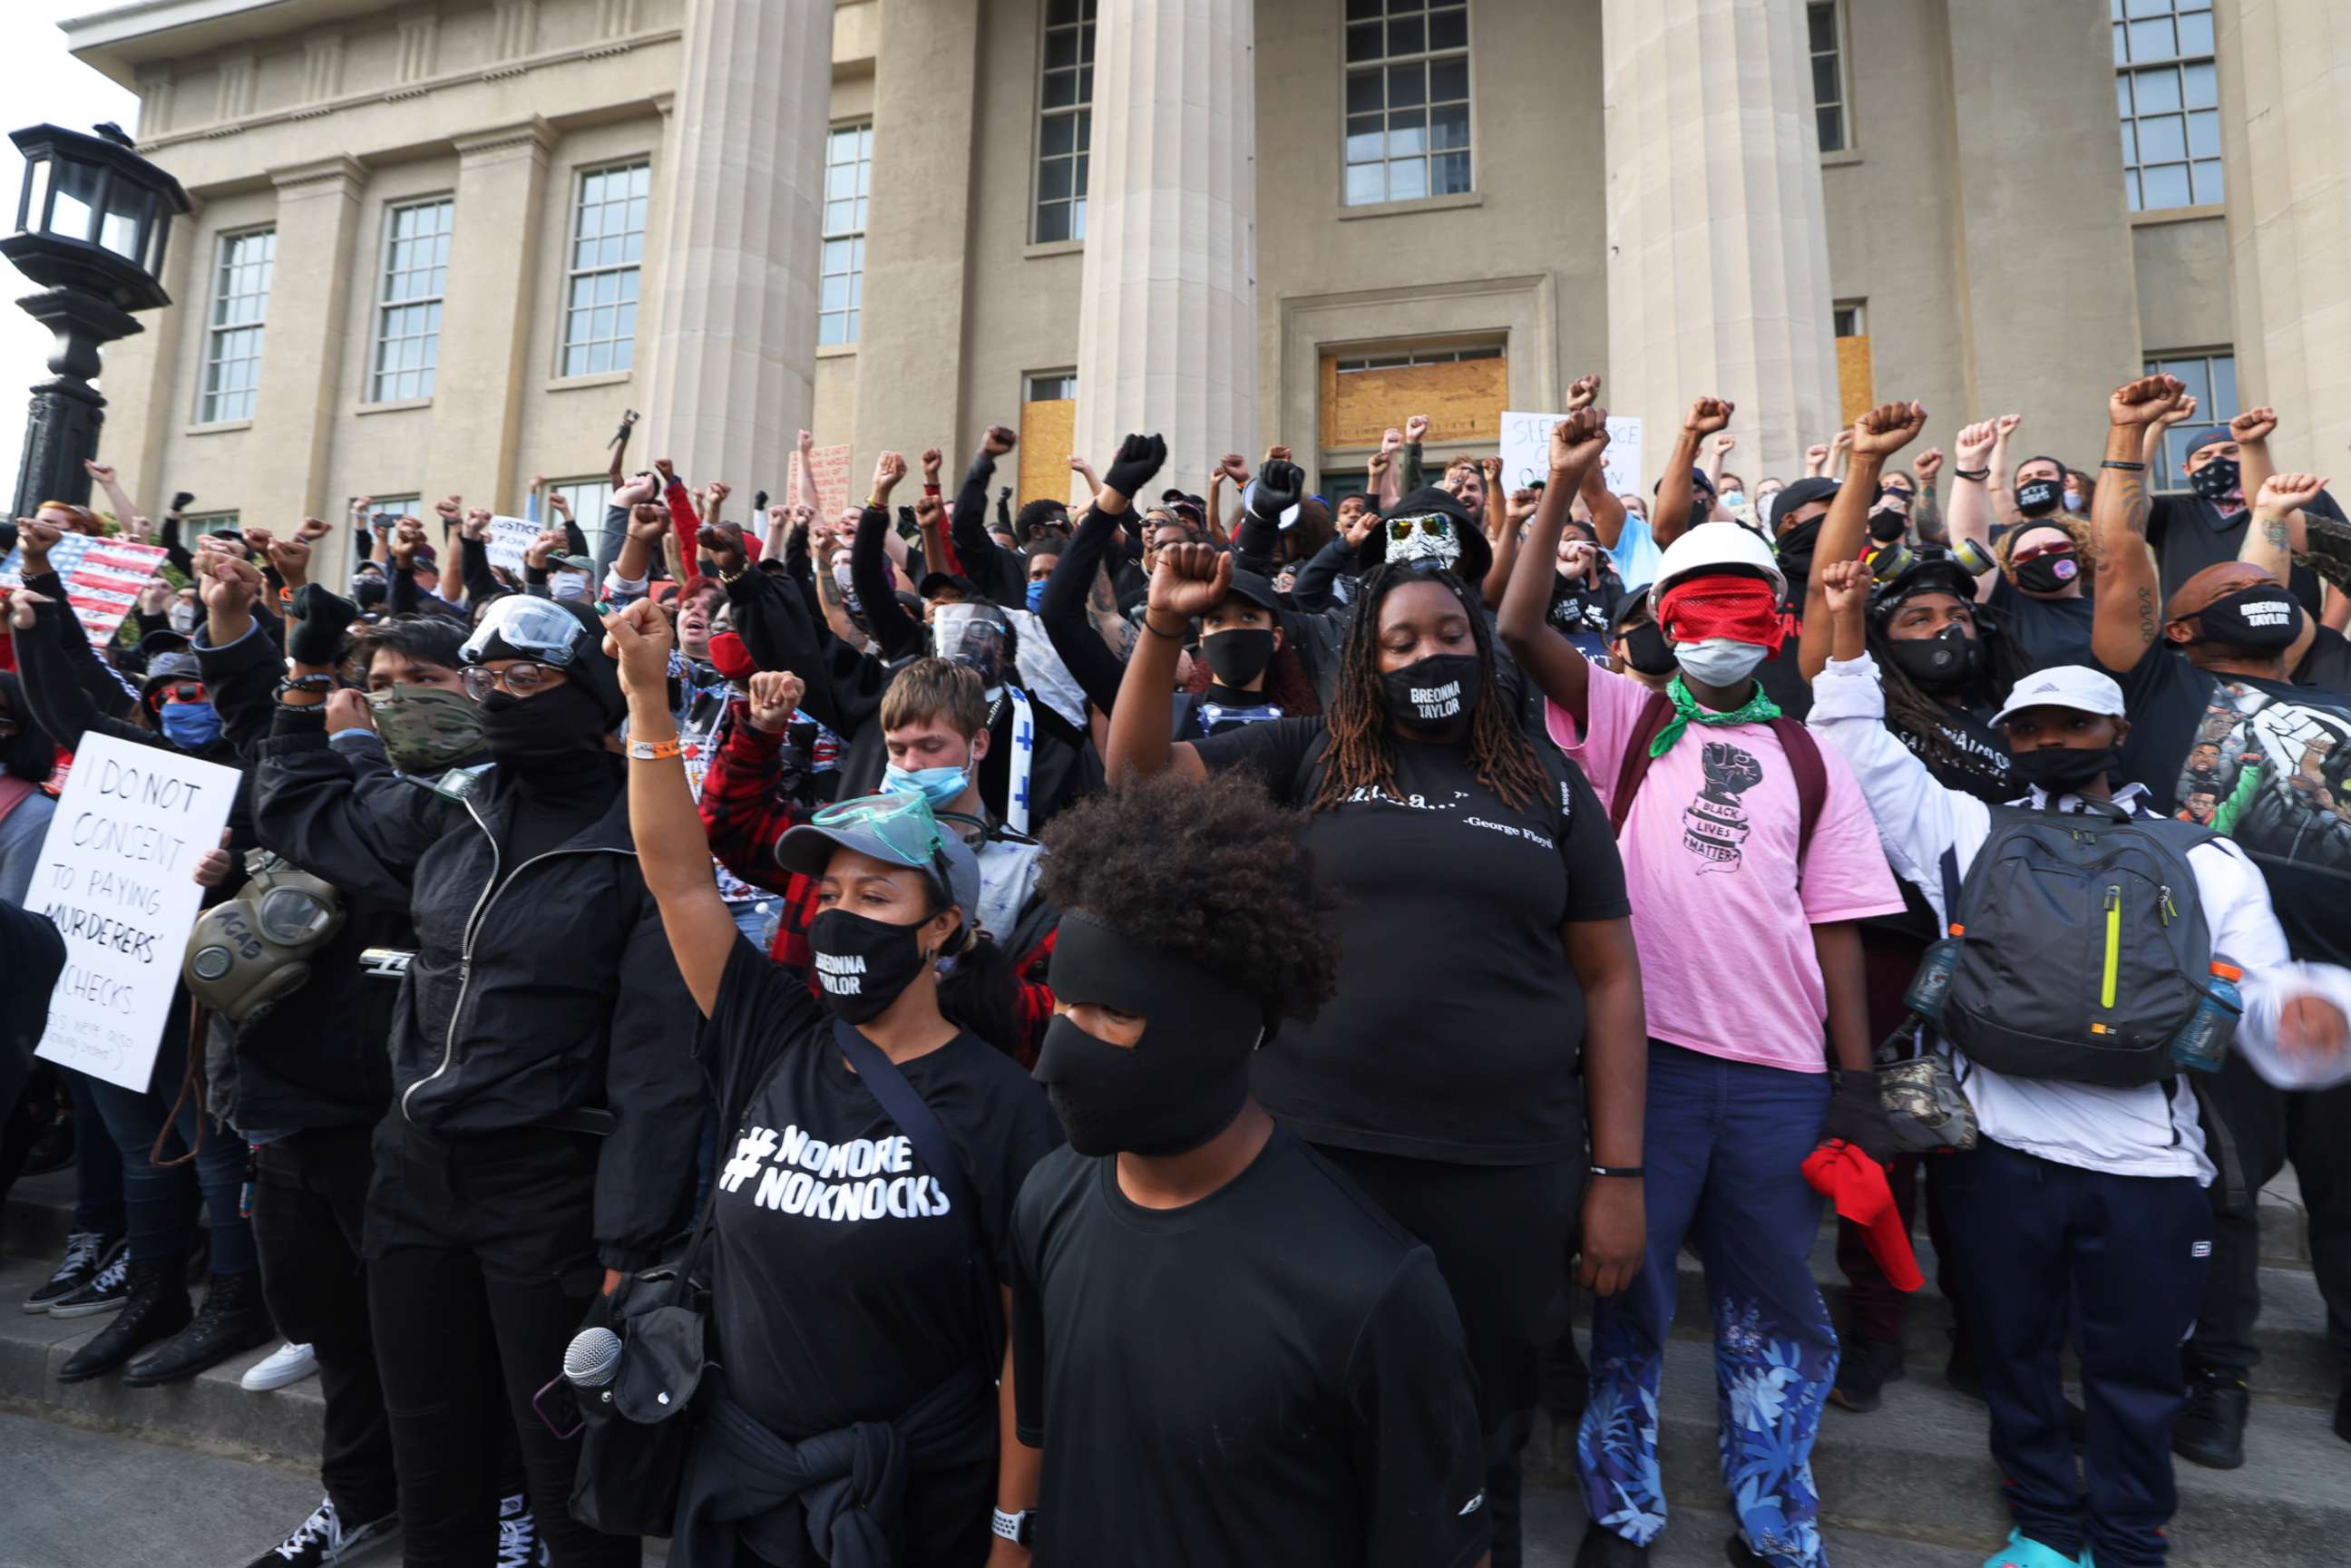 PHOTO: In this Sept. 24, 2020, file photo, demonstrators raise their fists on the steps of the Louisville Metro Hall after a Kentucky grand jury indicted a police officer involved in the shooting of Breonna Taylor with three counts of wanton endangerment.